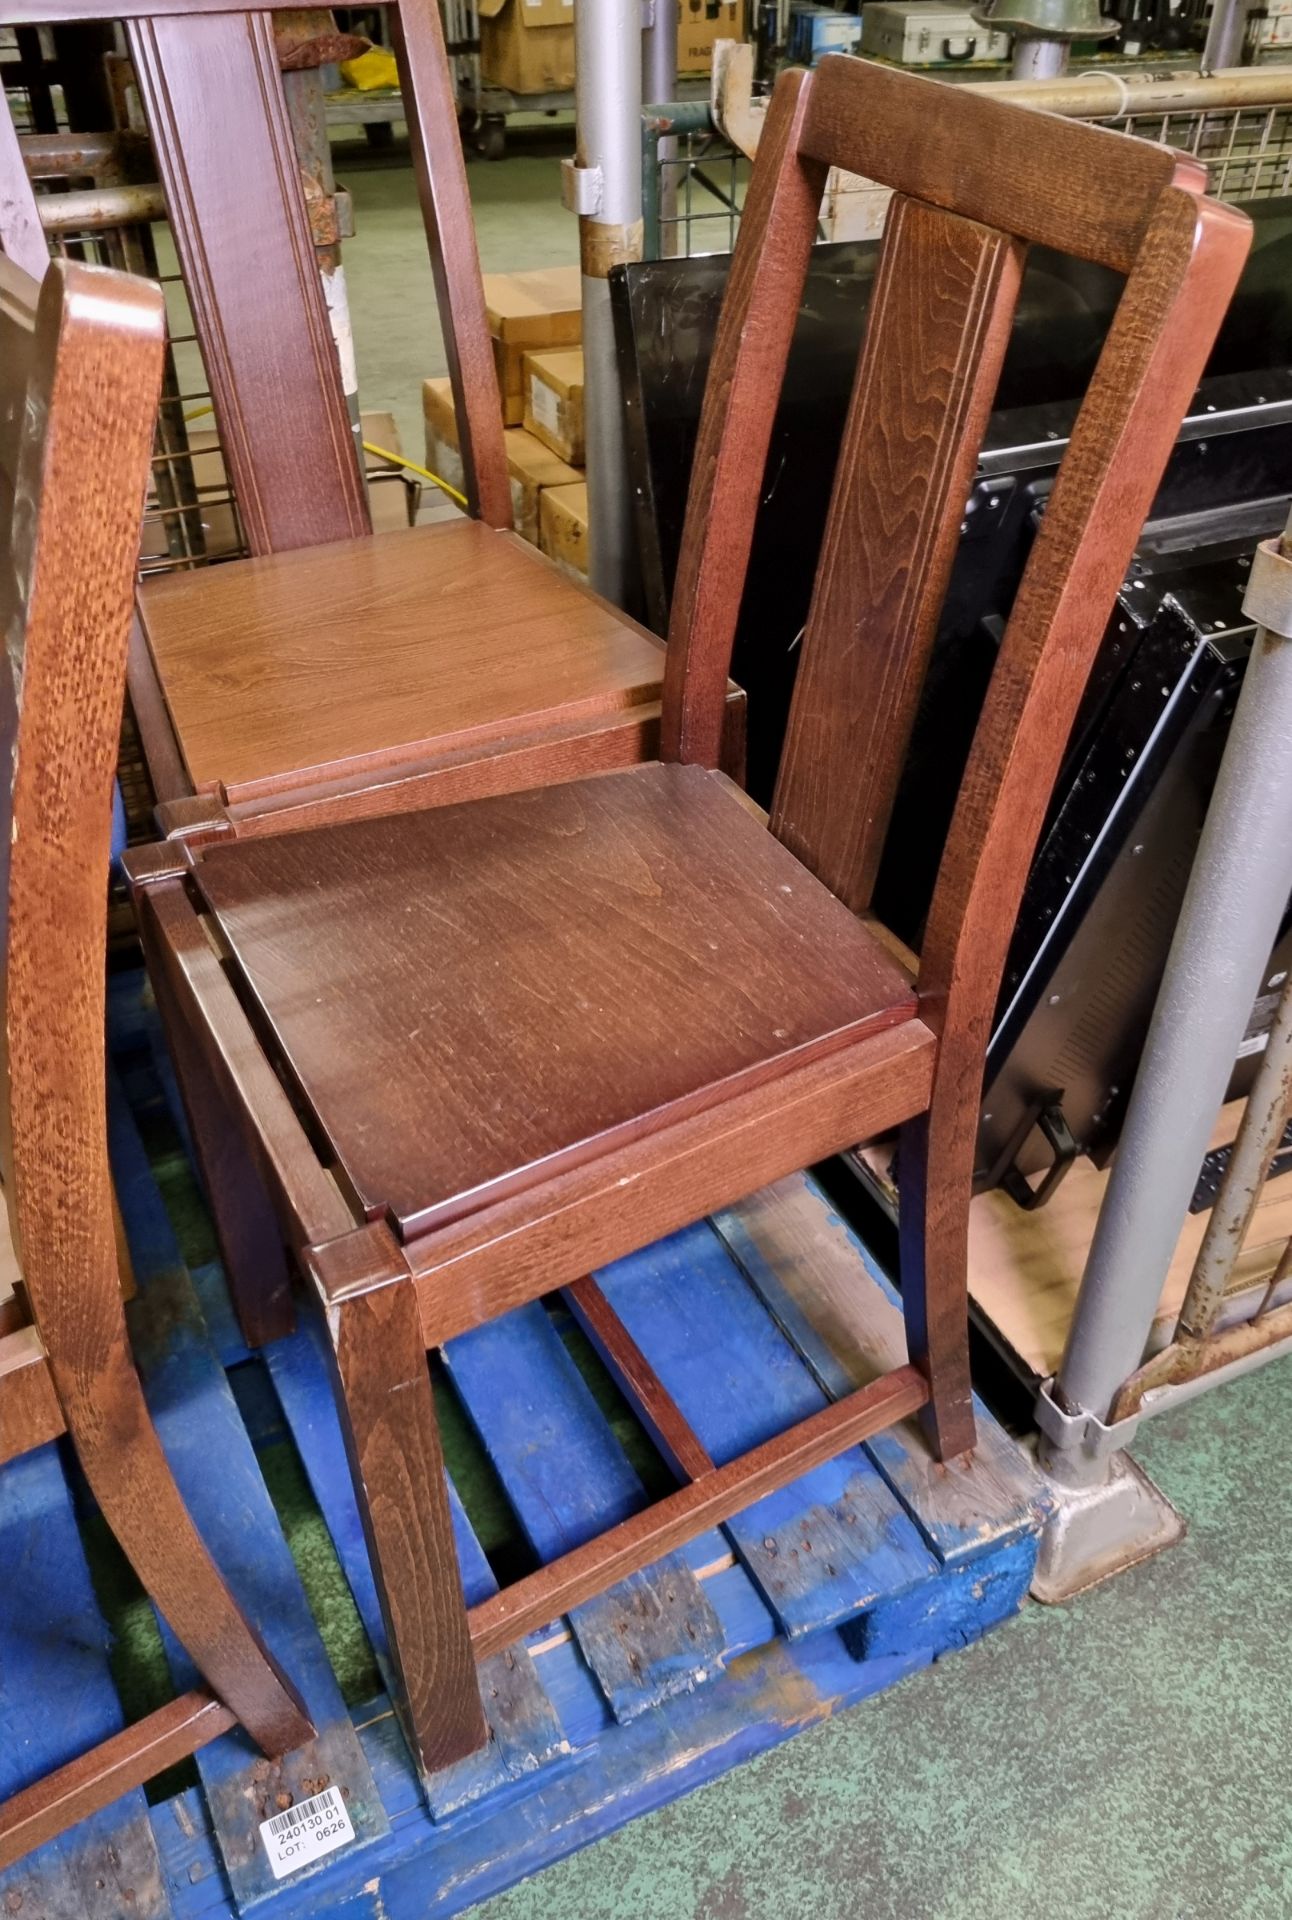 3x Brown wooden chairs, 1x Blue padded chair - Image 4 of 6